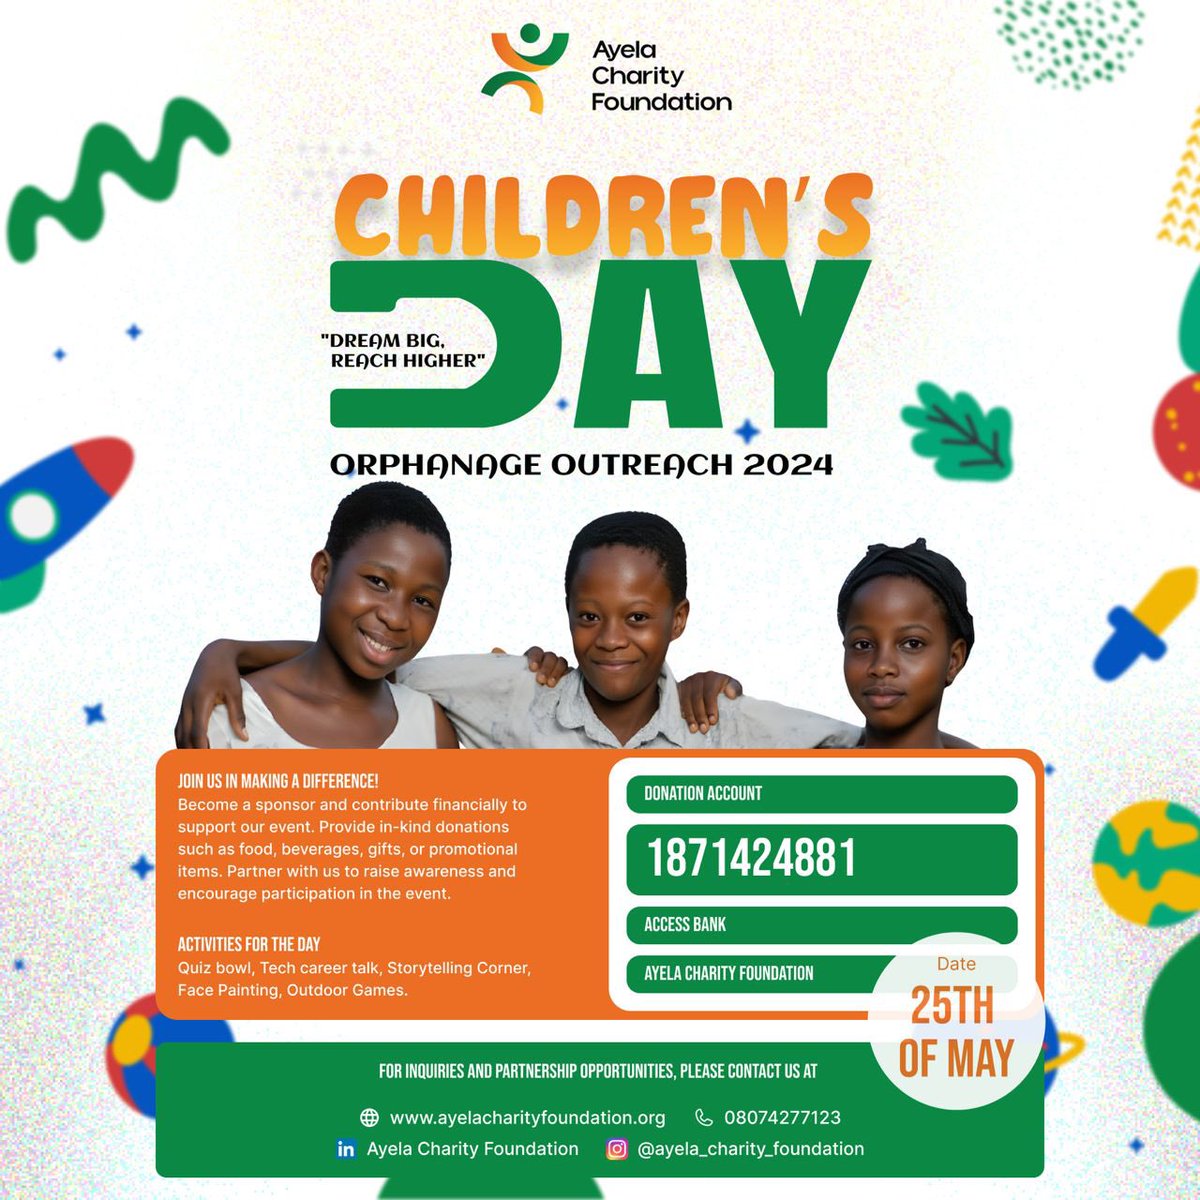 I met this lady during CyberFest while speaking to the kids she led to the event. She also runs this foundation for Orphaned kids and will be having an event on Saturday at 42, local airport road, ikeja. They also are in need of financial support 🙏🏾